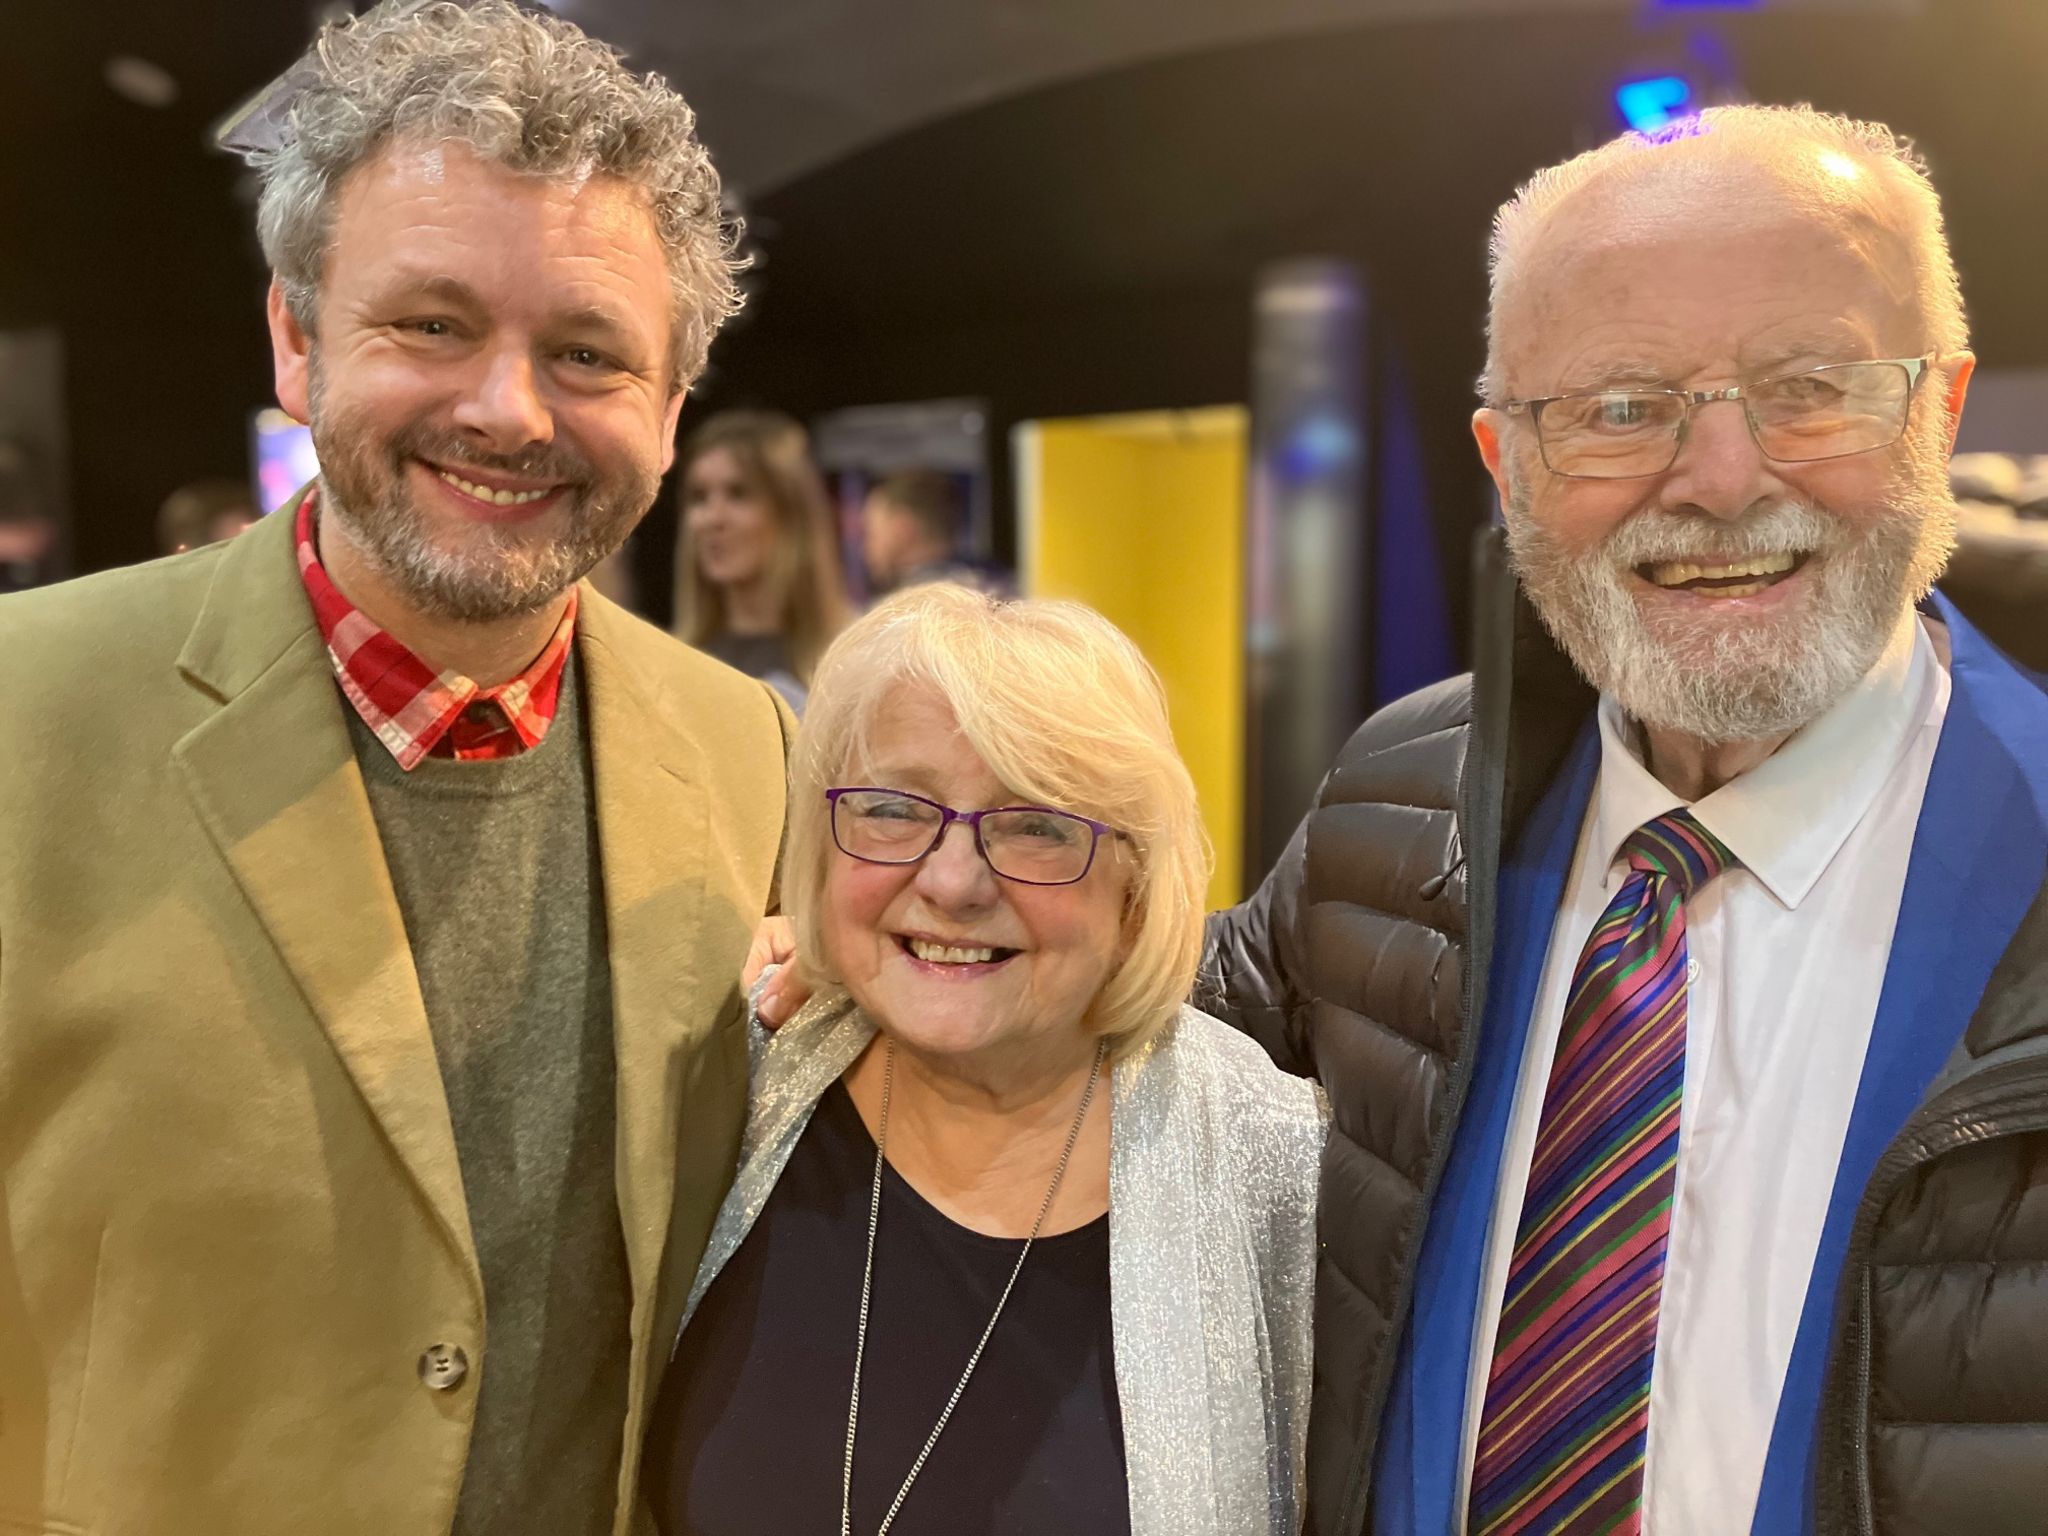 Michael Sheen at the The Way premiere in Port Talbot with his parents